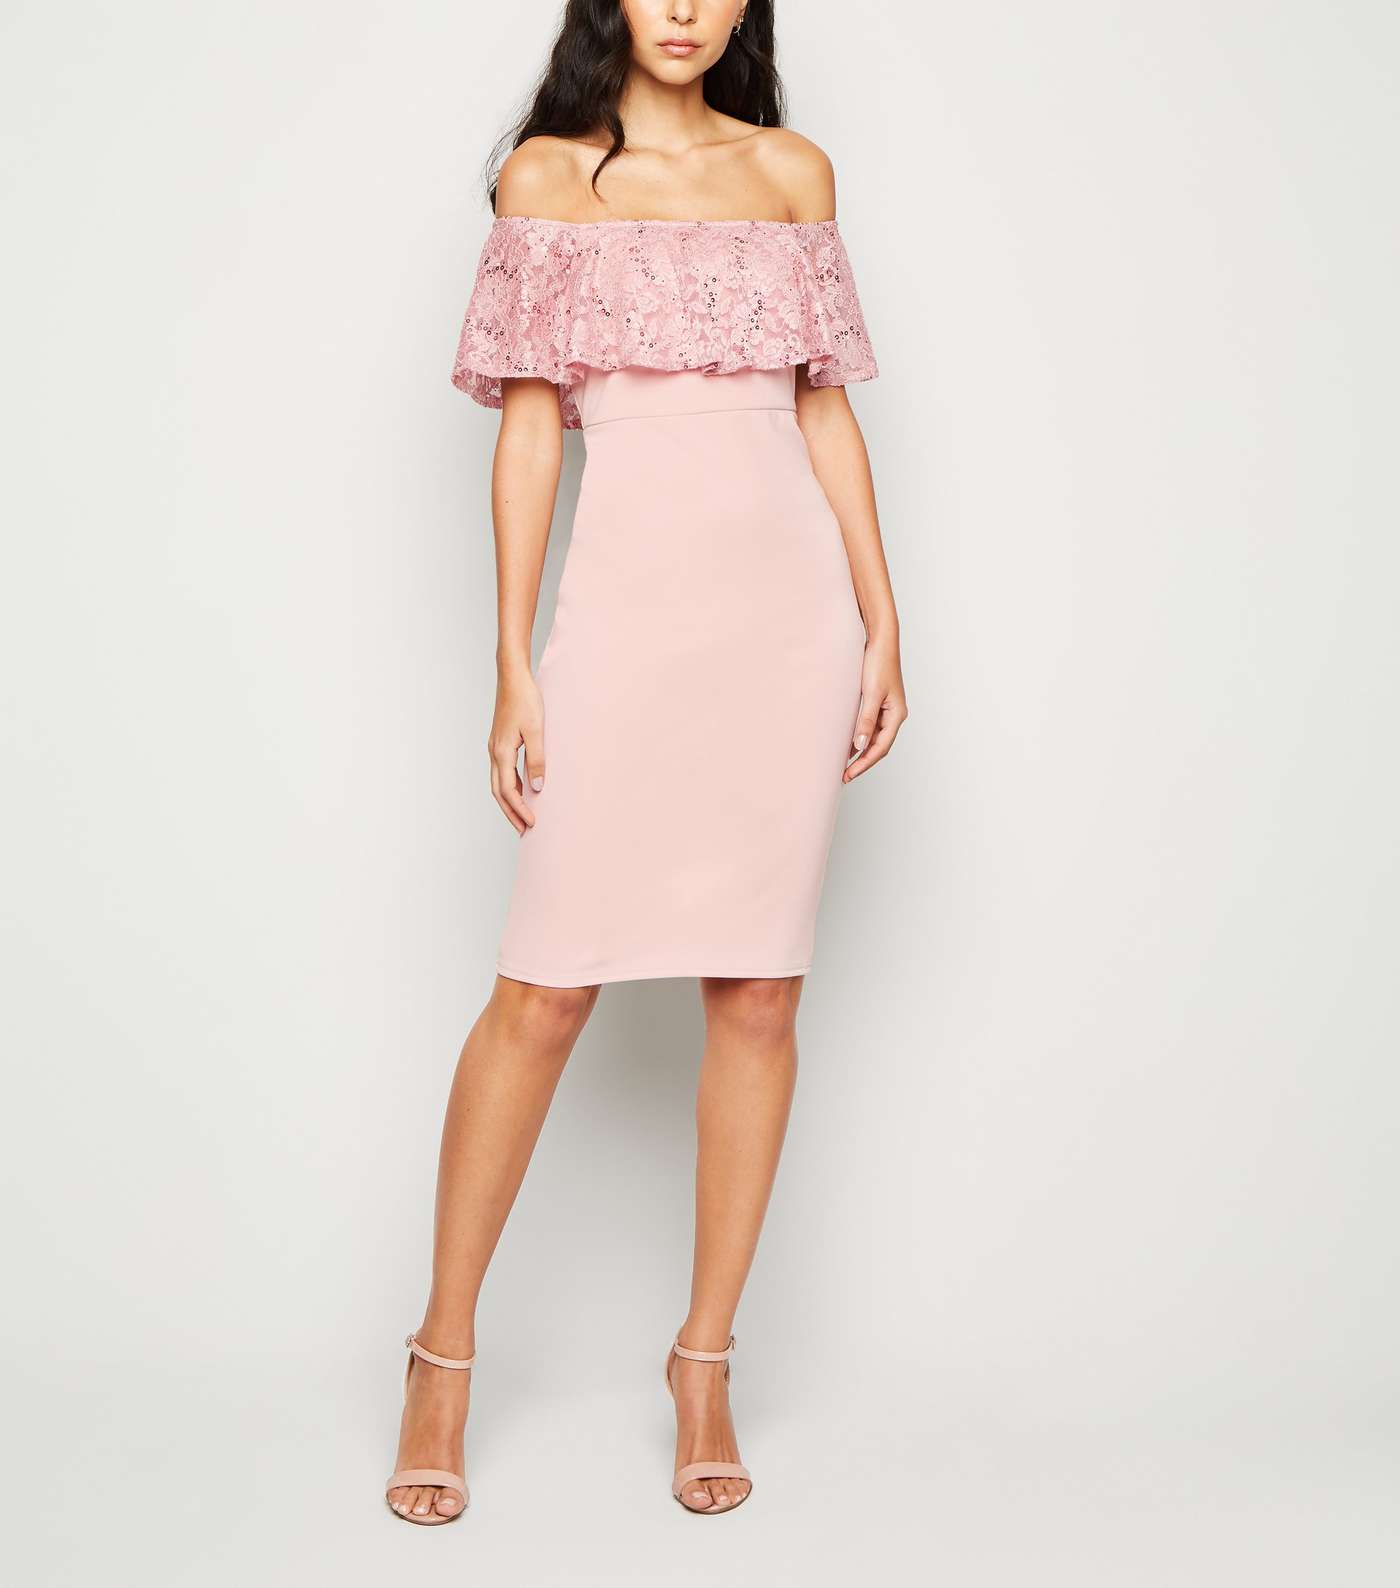 Pale Pink Sequin and Lace Bardot Bodycon Dress Image 2